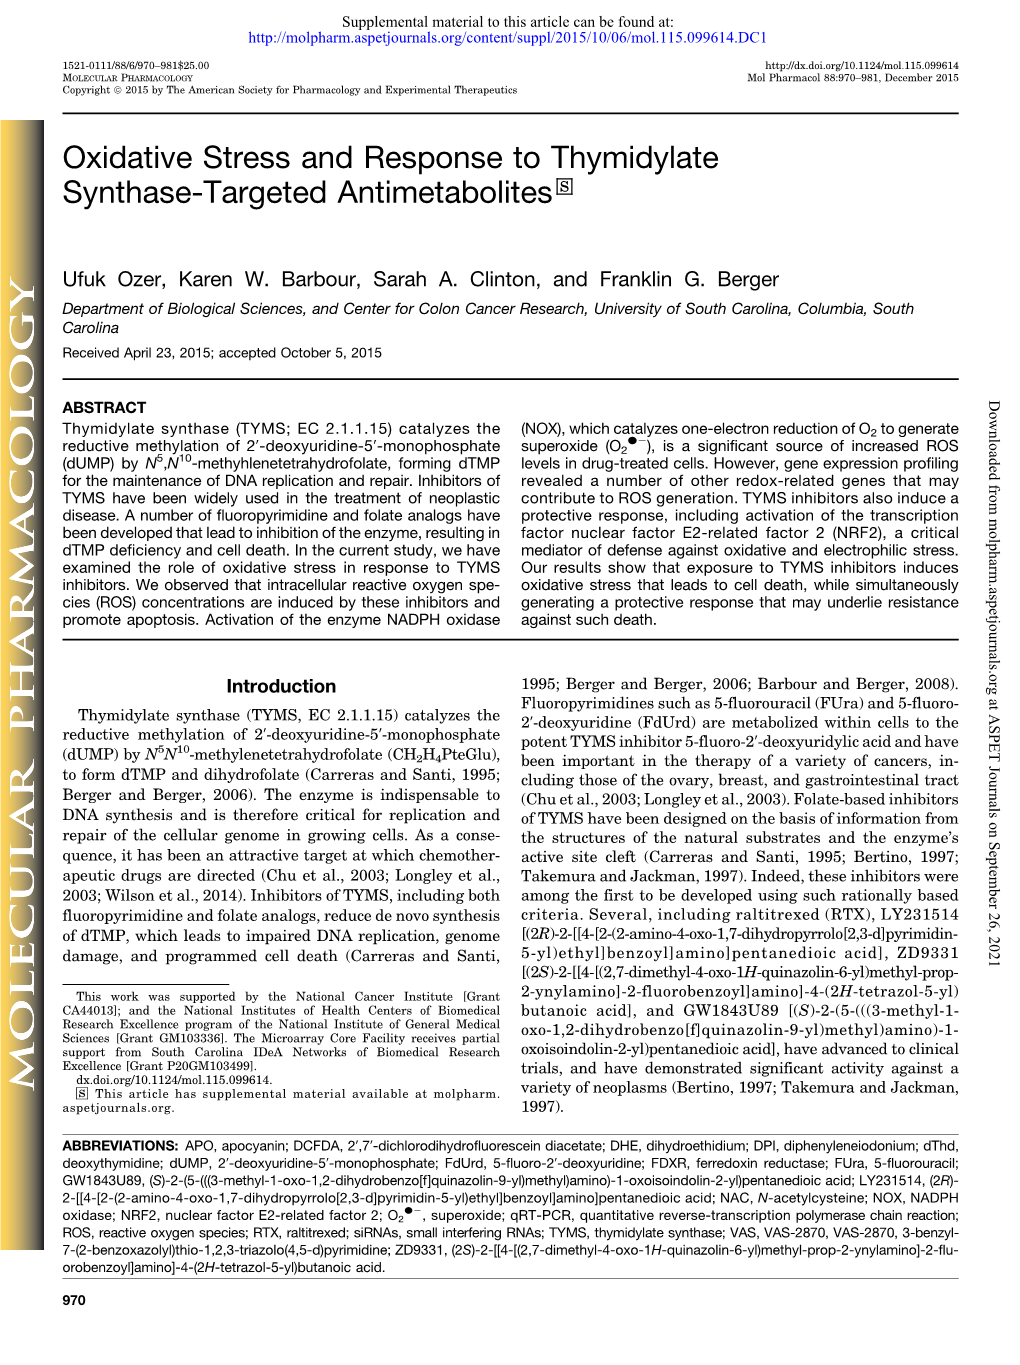 Oxidative Stress and Response to Thymidylate Synthase-Targeted Antimetabolites S